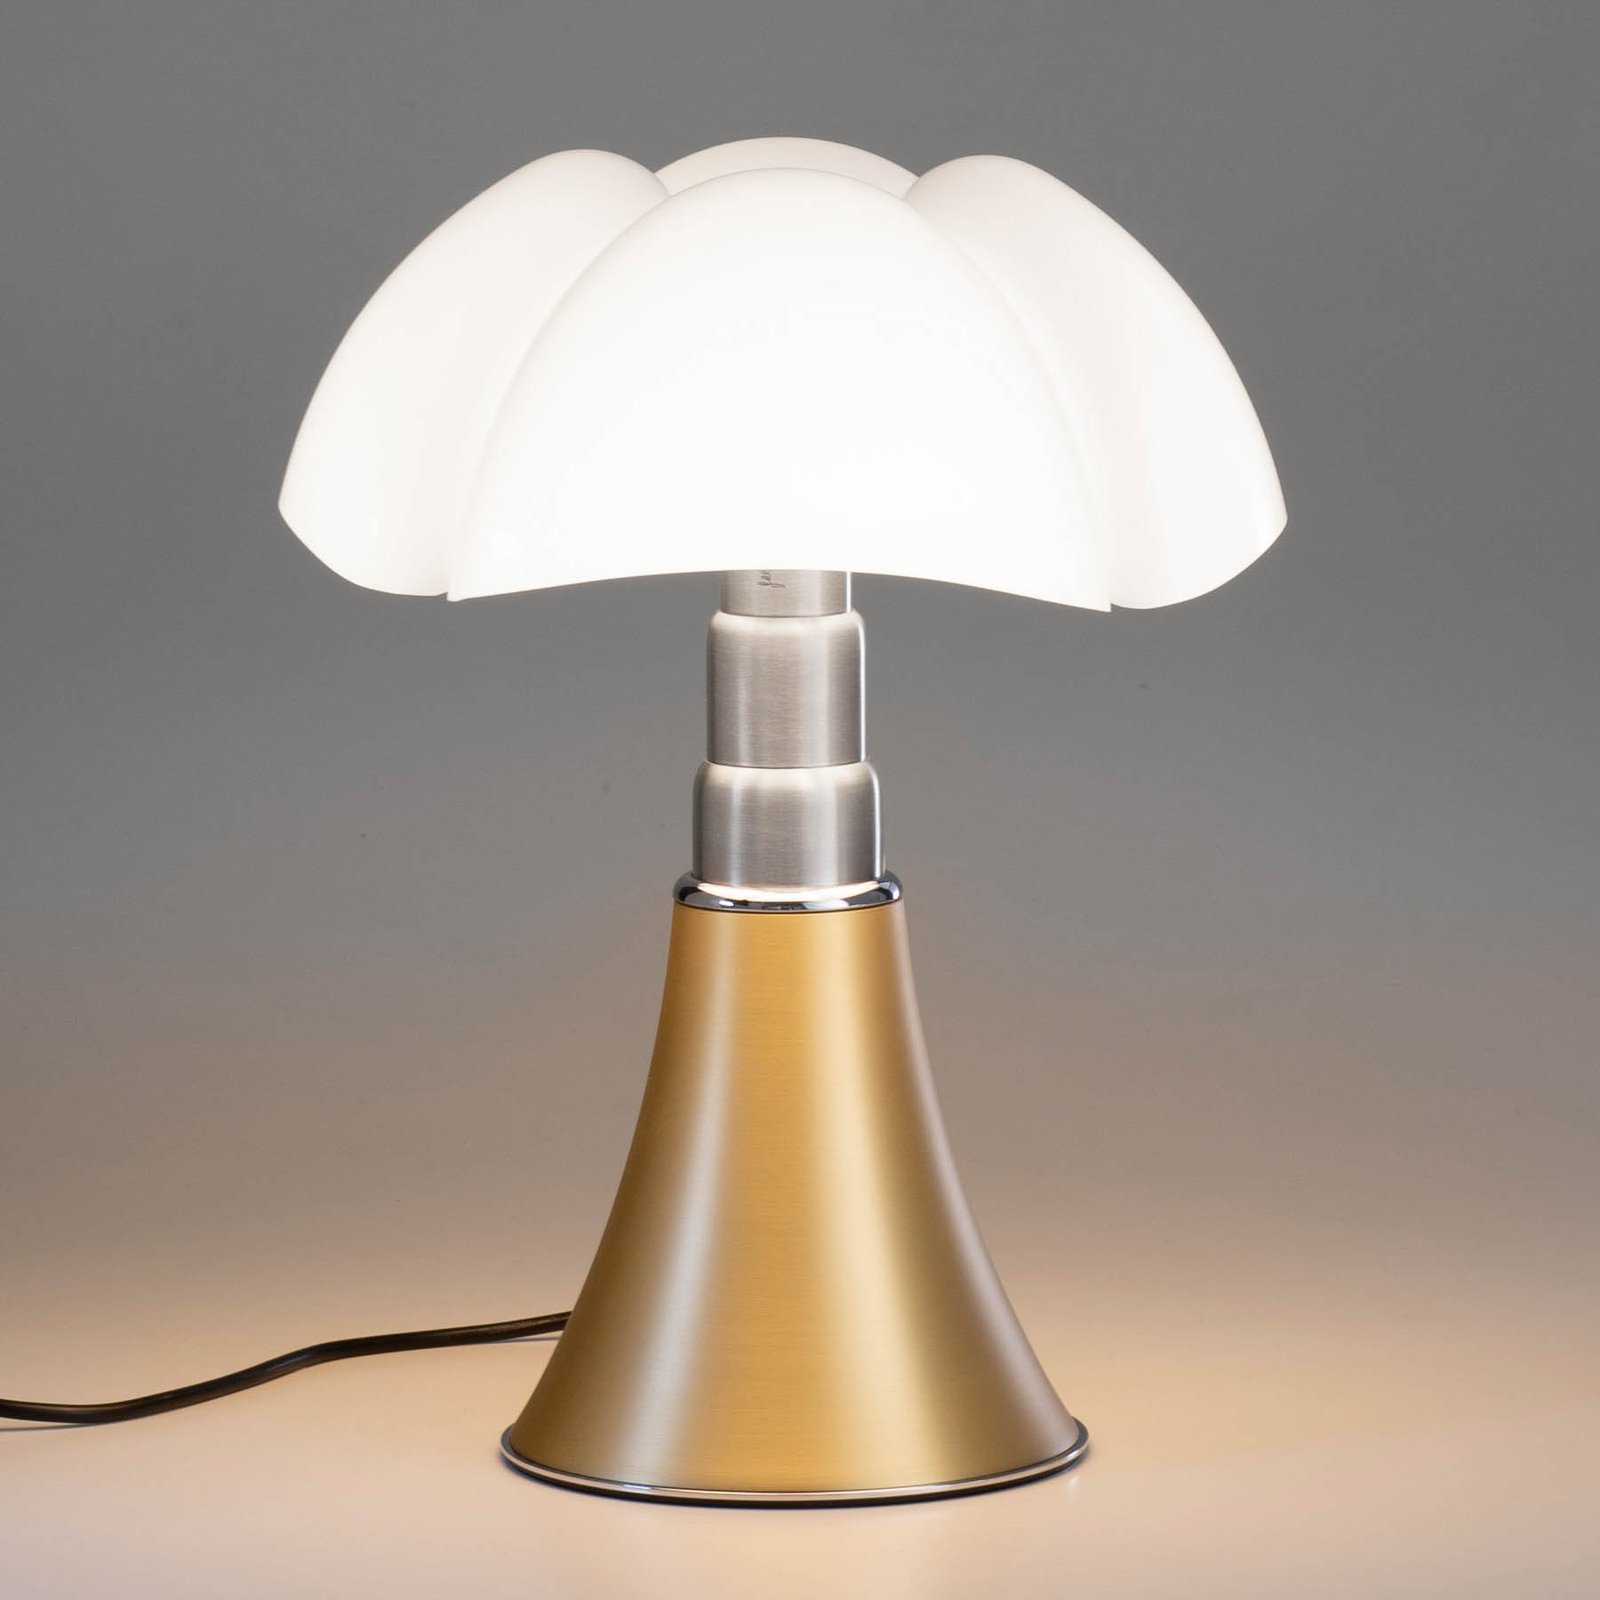 Martinelli Luce Pipistrello LED dimmable, 24c gold